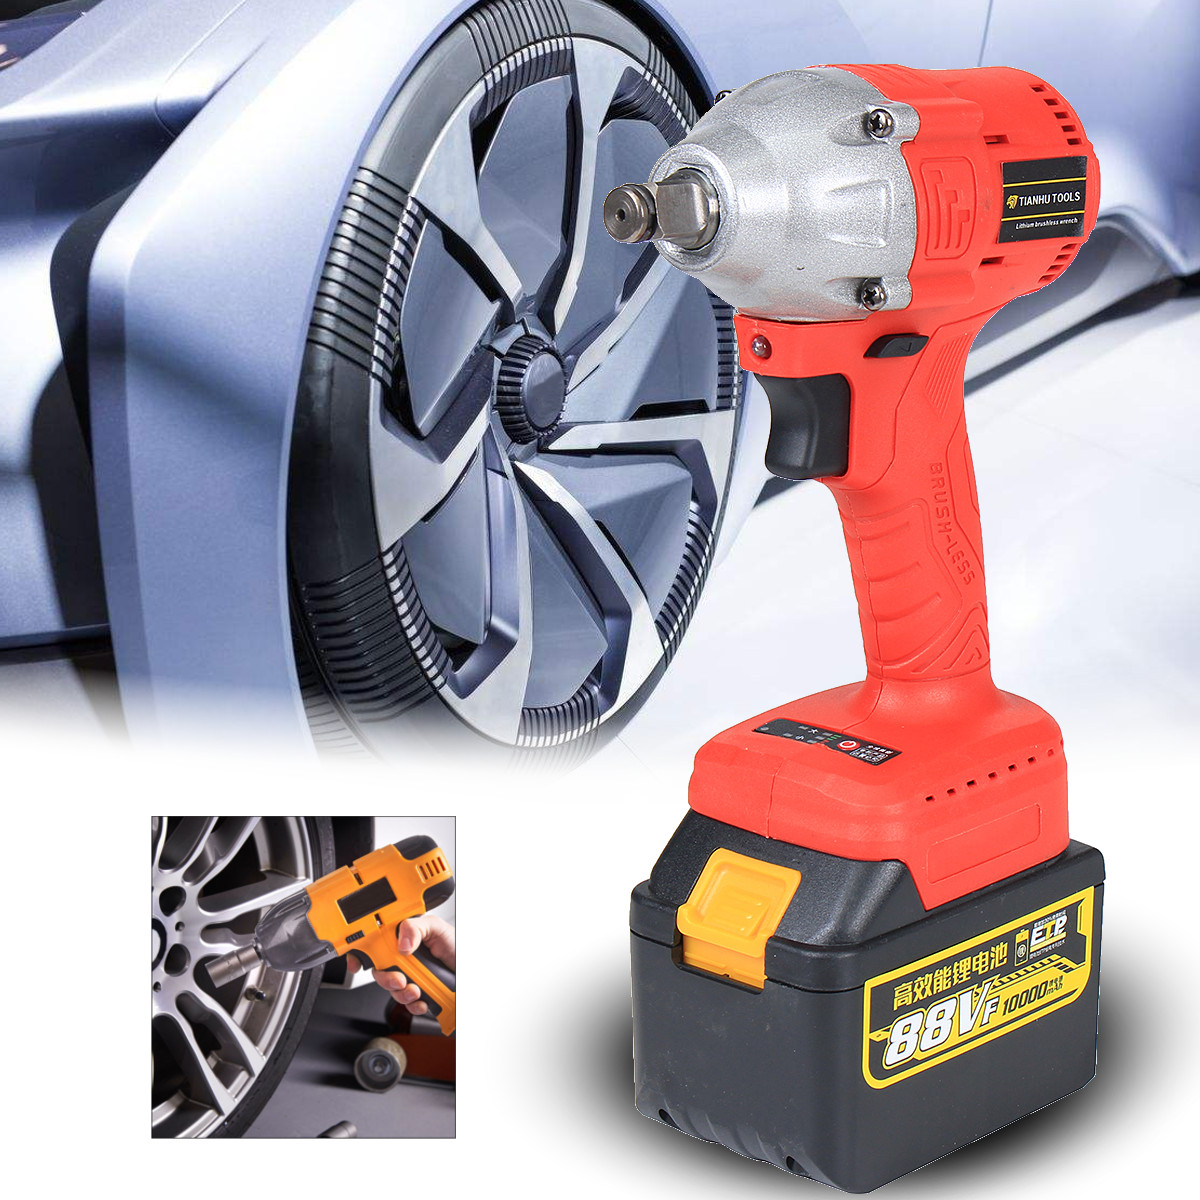 88V-10000mAH-110V-220V-Electric-Wrench-Lithium-Ion-Drive-Cordless-Power-Wrench-320Nm-Torque-1262268-2